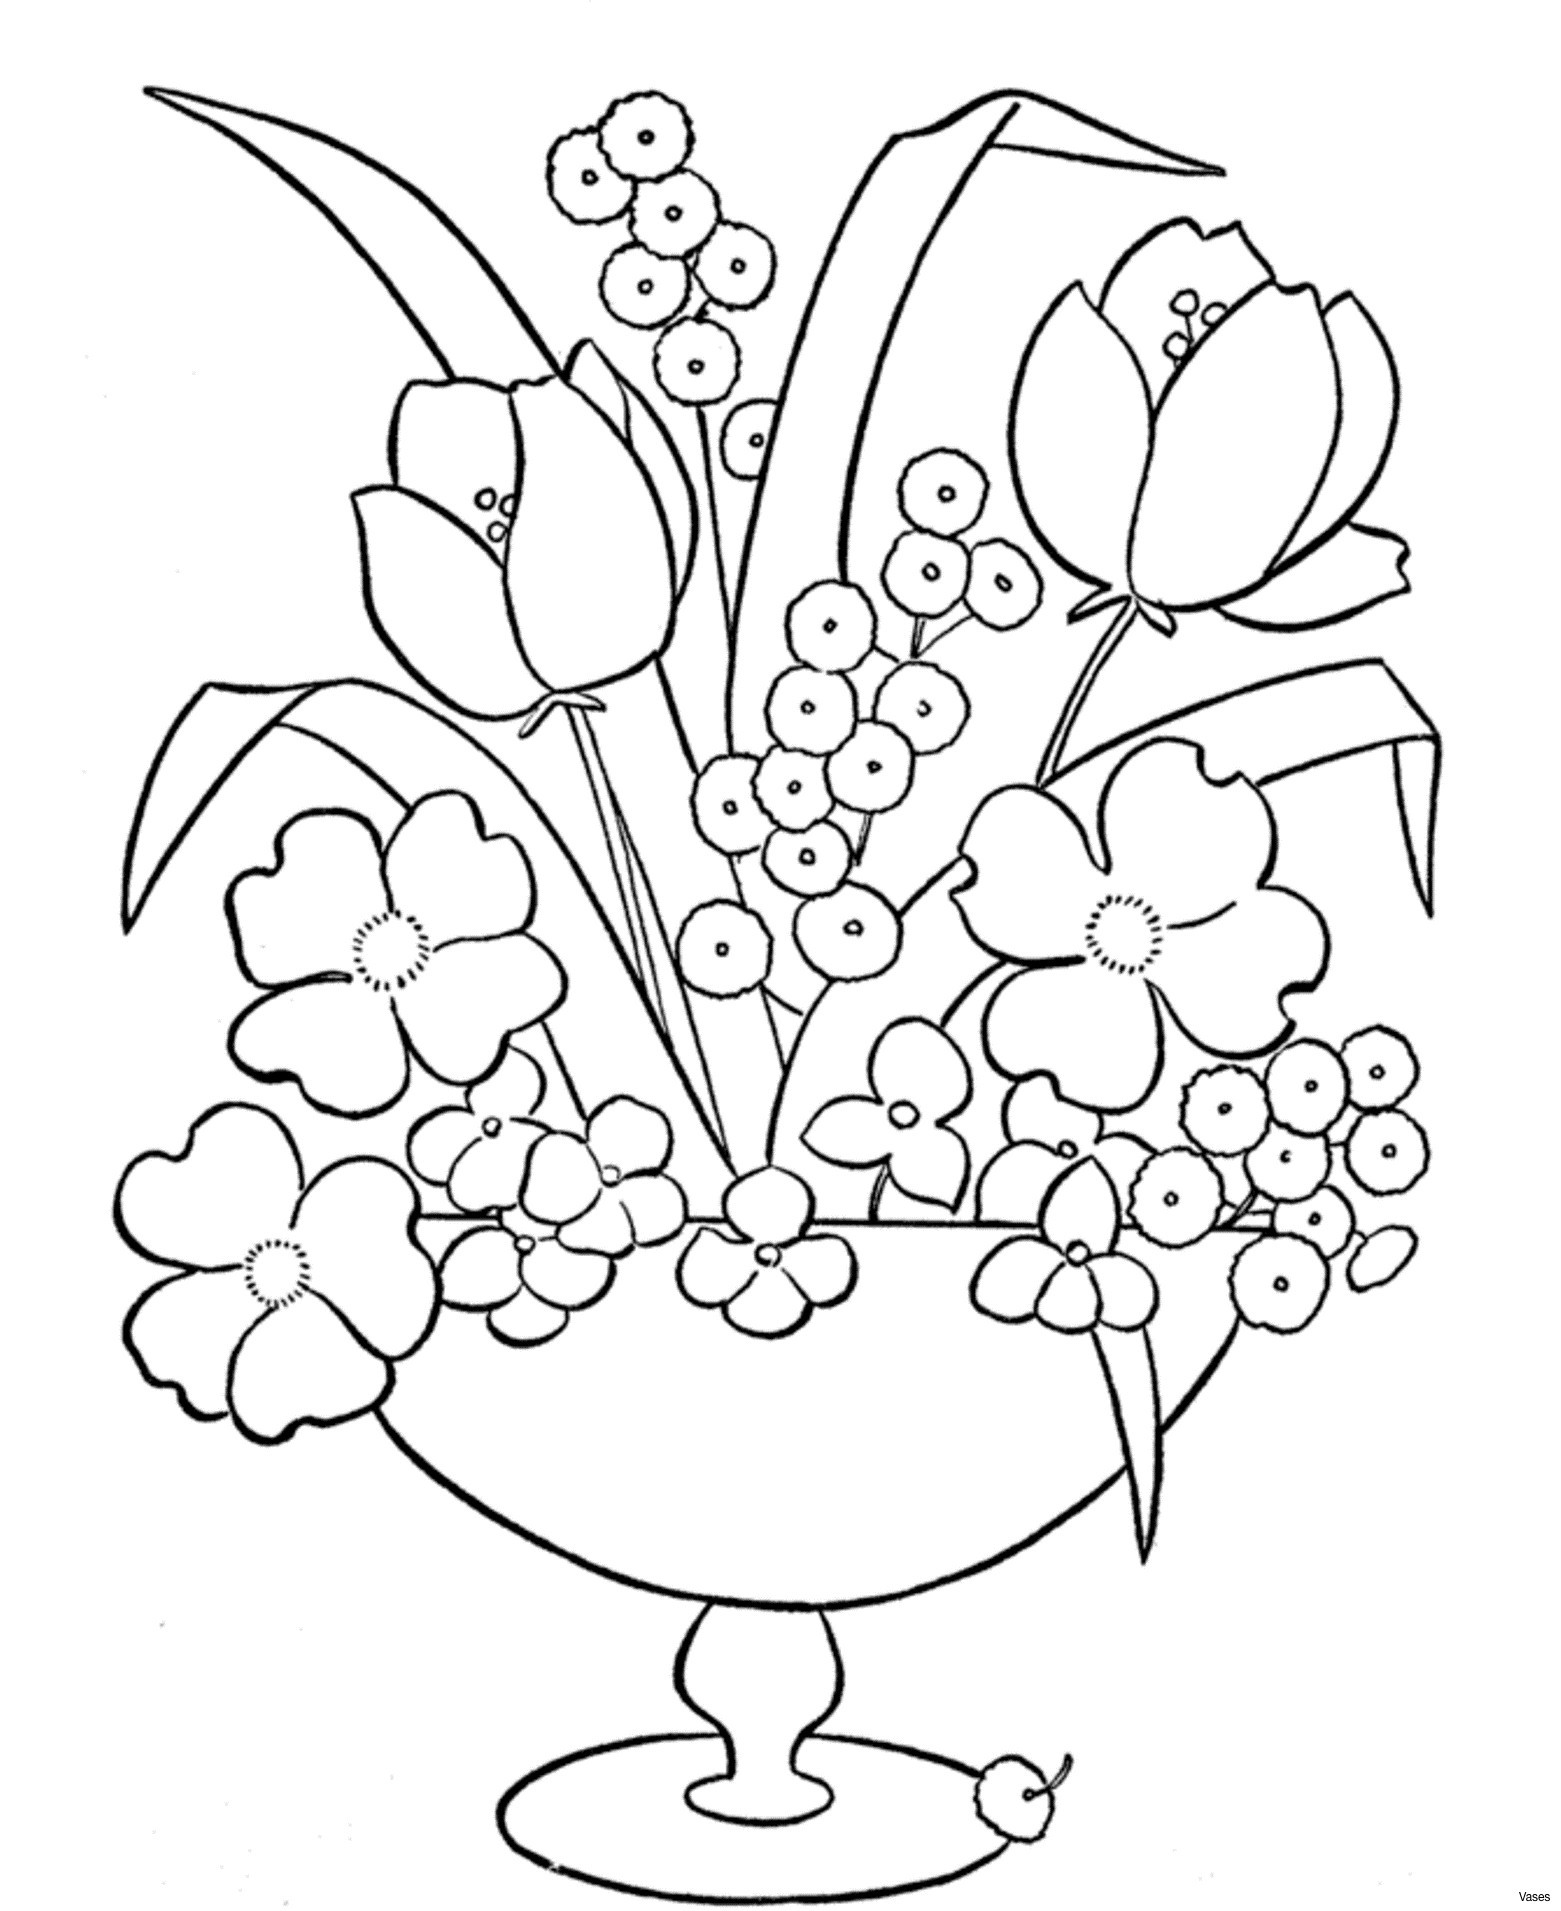 29 Unique Pictures Of Roses In A Vase 2024 free download pictures of roses in a vase of skateboard coloring sheets cool vases flower vase coloring page regarding skateboard coloring sheets cool vases flower vase coloring page pages flowers in a to